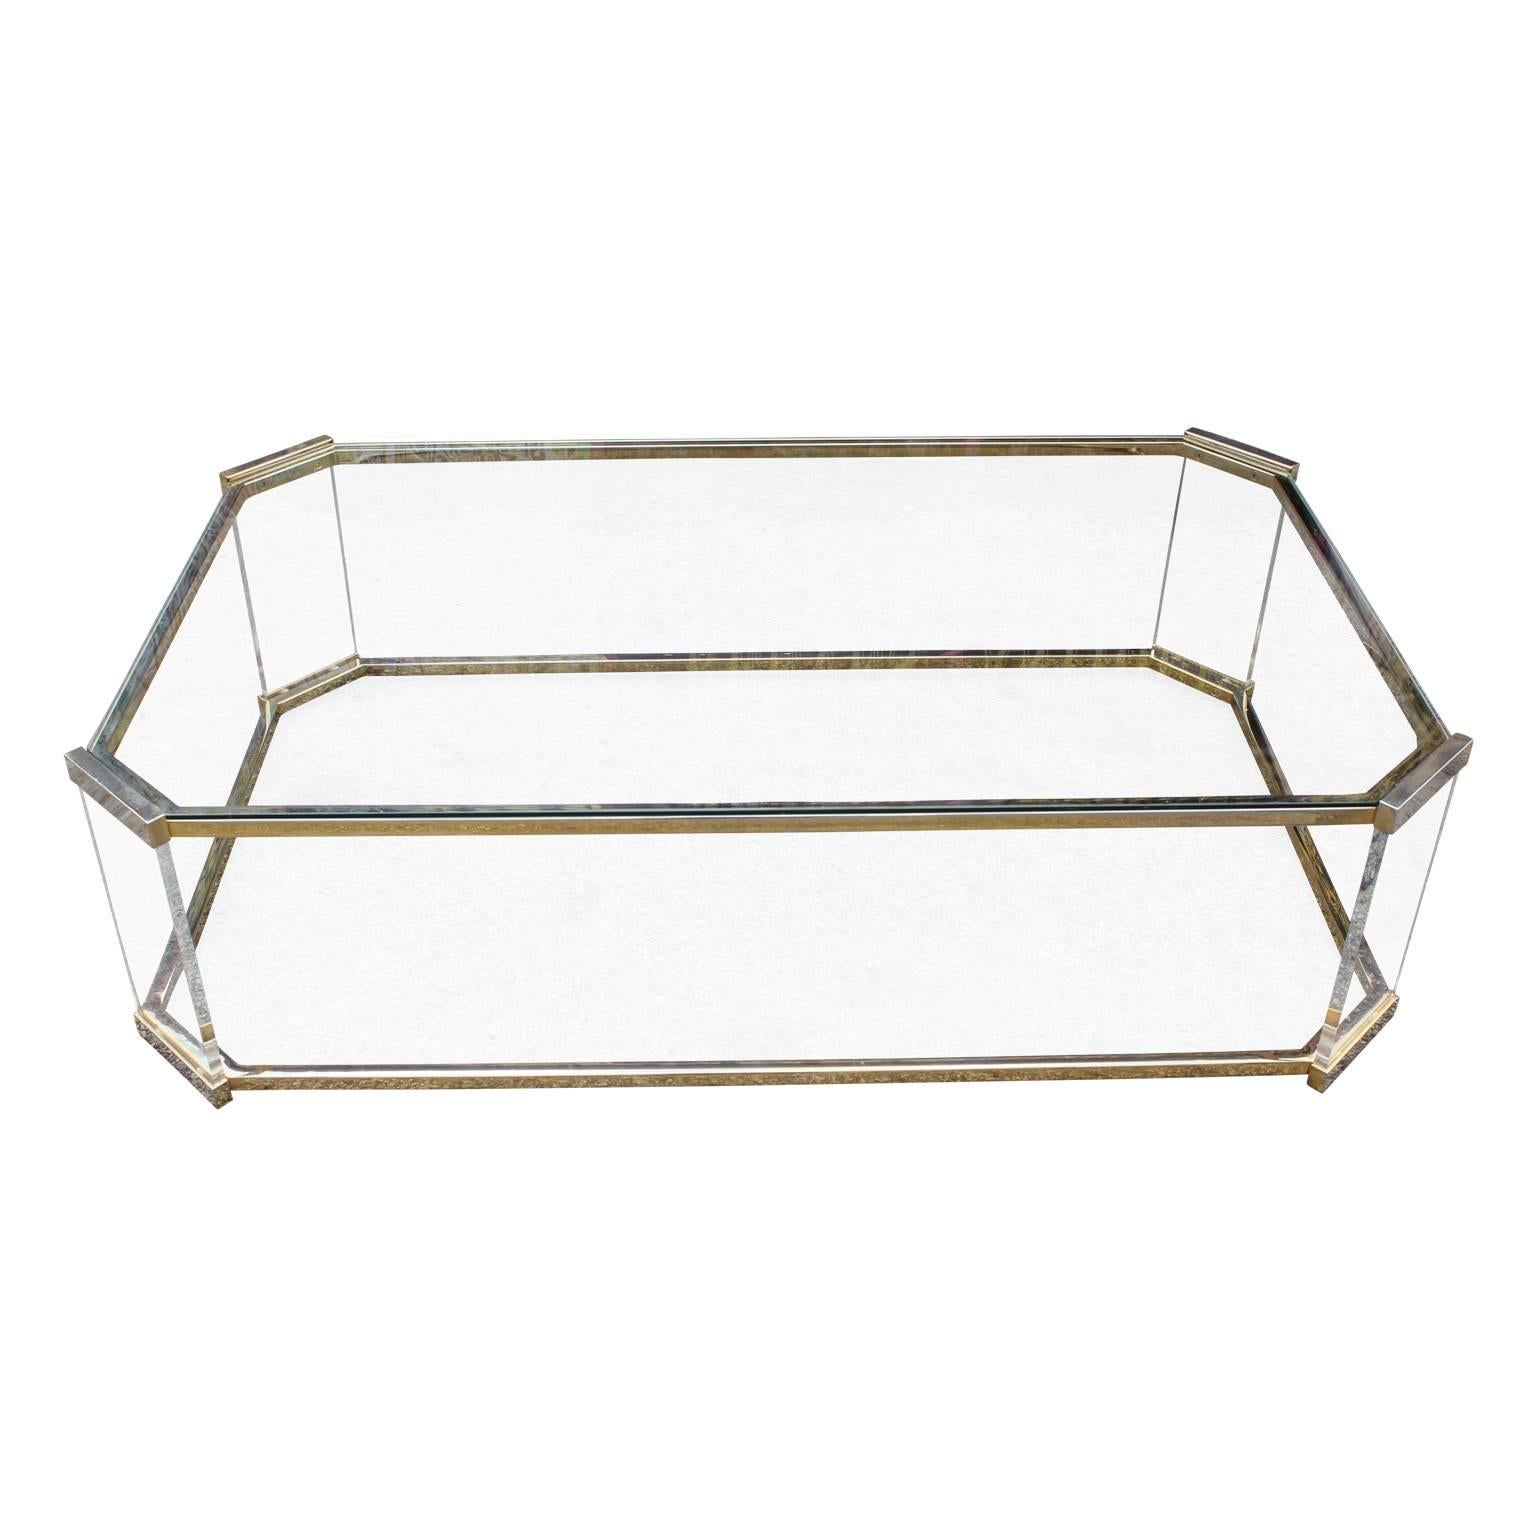 Modern brass, glass and Lucite rectangular coffee table. The brass finish does have some slight wear in places.